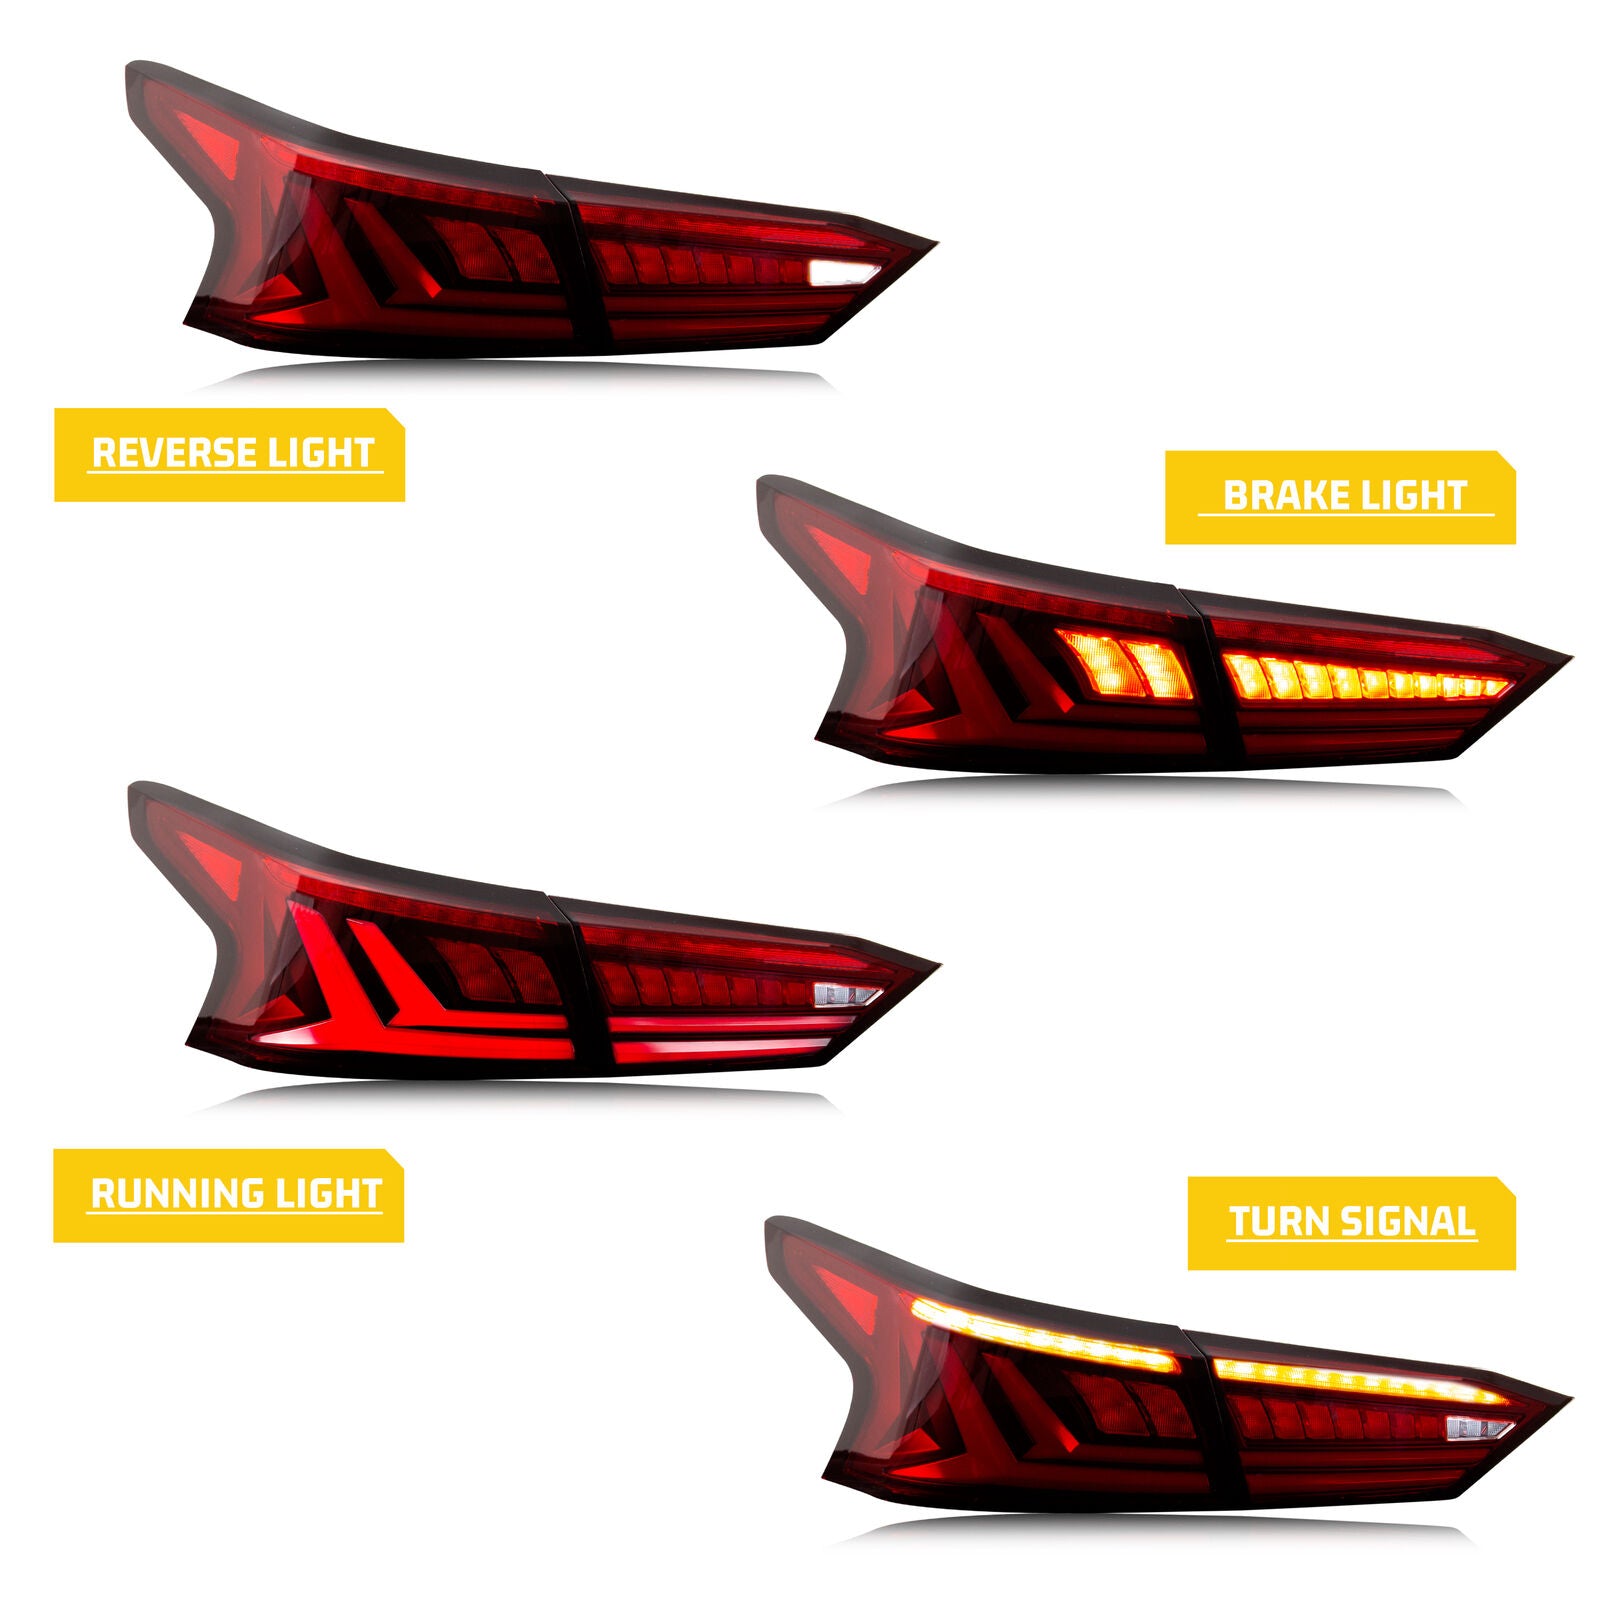 inginuity time LED Tail Lights for Nissan Altima 2019 2020 2021 2022 2023  Rear Lamps Start-up Animation Sequential Indicator